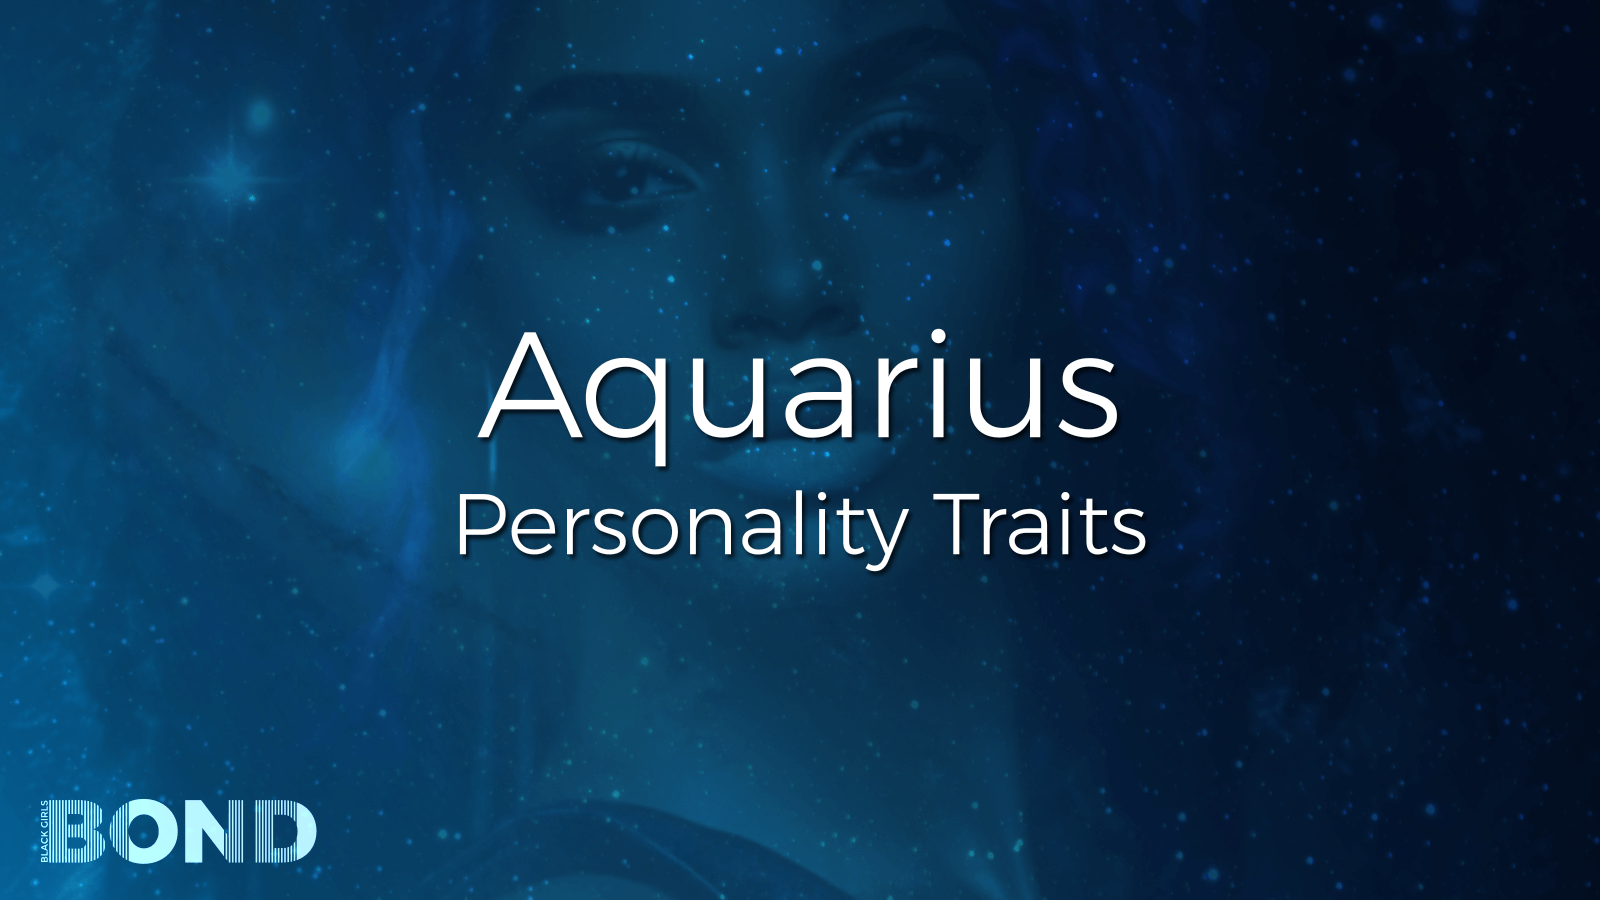 Aquarius Zodiac Sign: Personality Traits, Compatibility, Love, Relationships and More